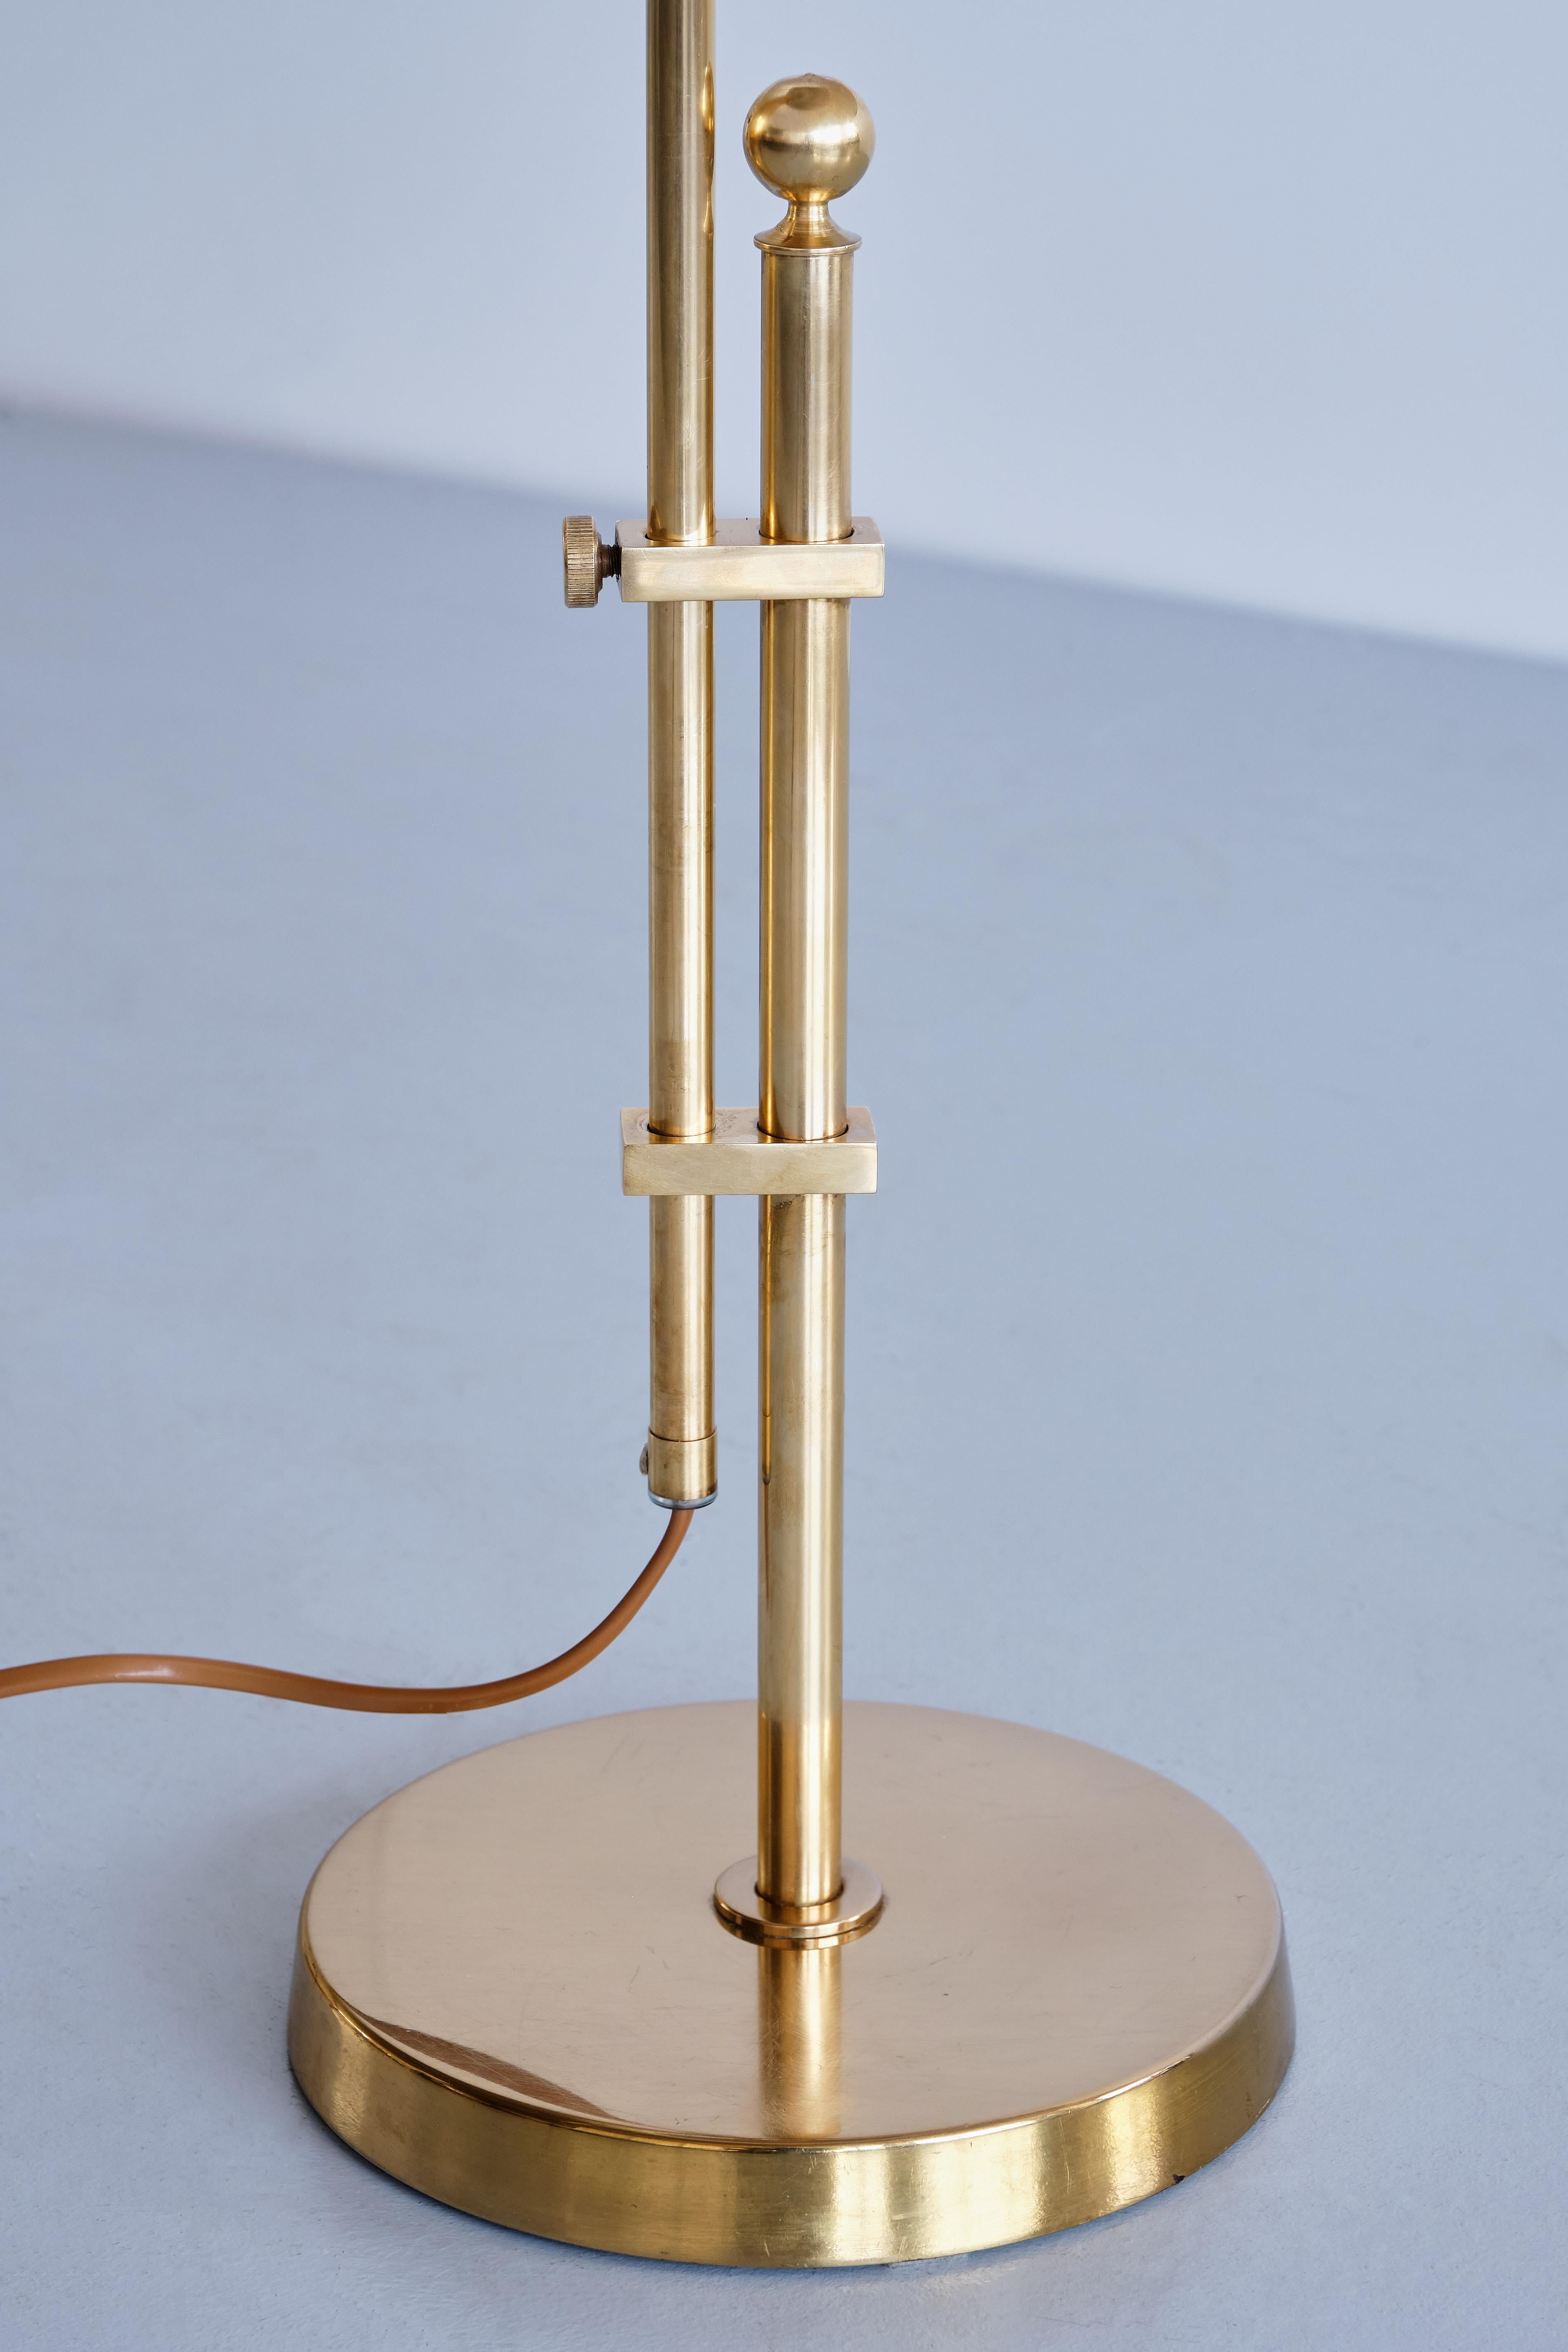 Bergboms B-131 Height Adjustable Table Lamp in Brass, Sweden, 1950s For Sale 1